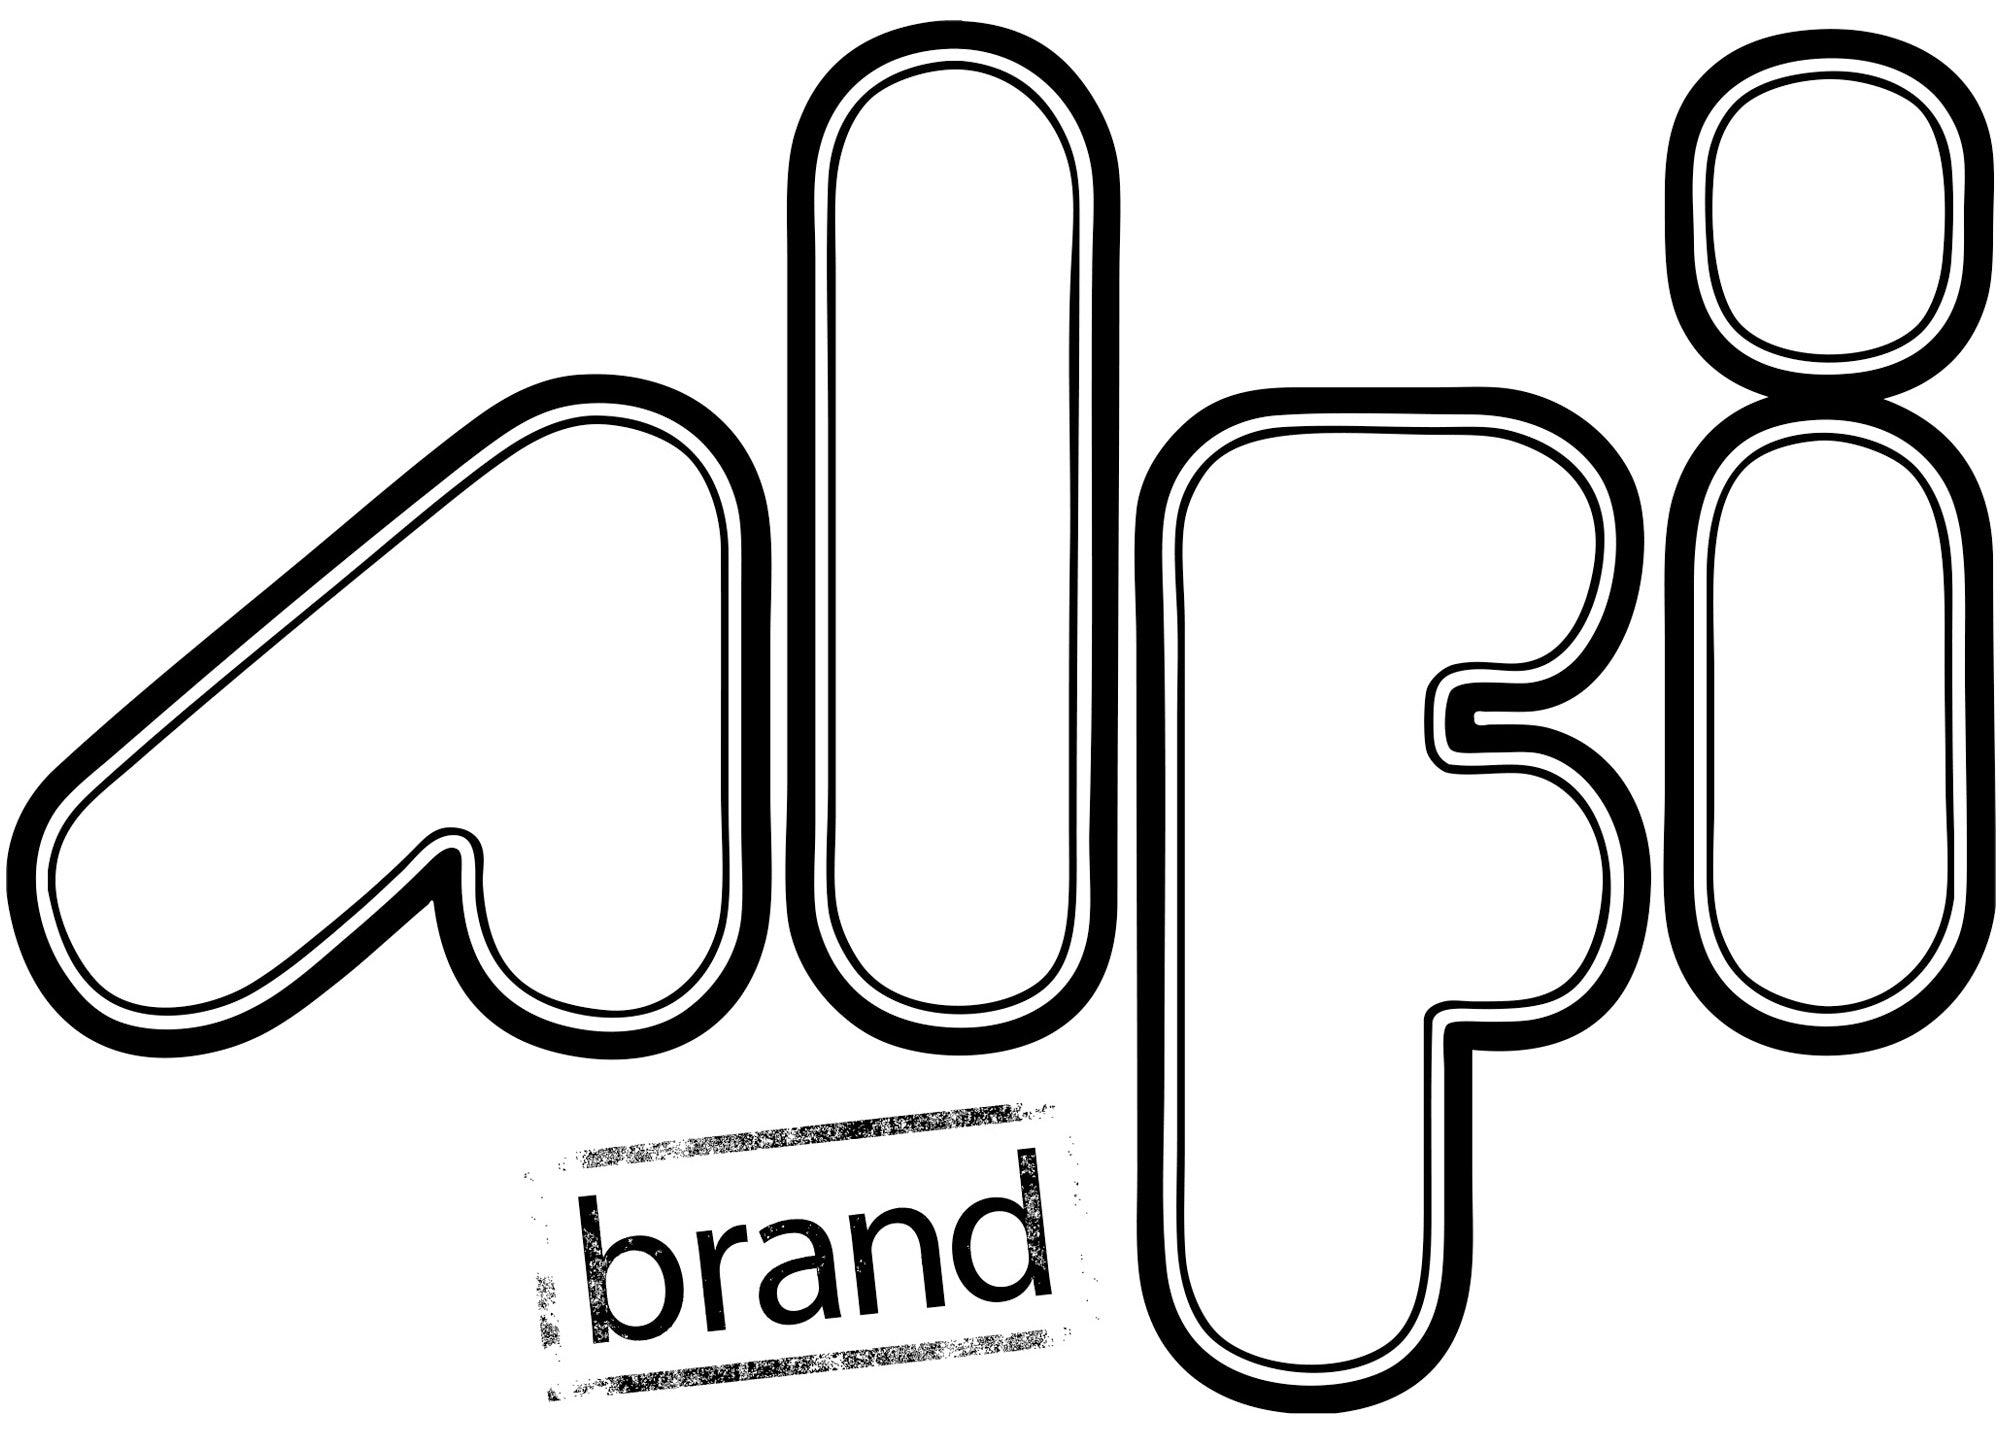 ALFI Brand - Brushed Stainless Steel Recessed Toilet Paper Holder with Cover | ABTP77-BSS